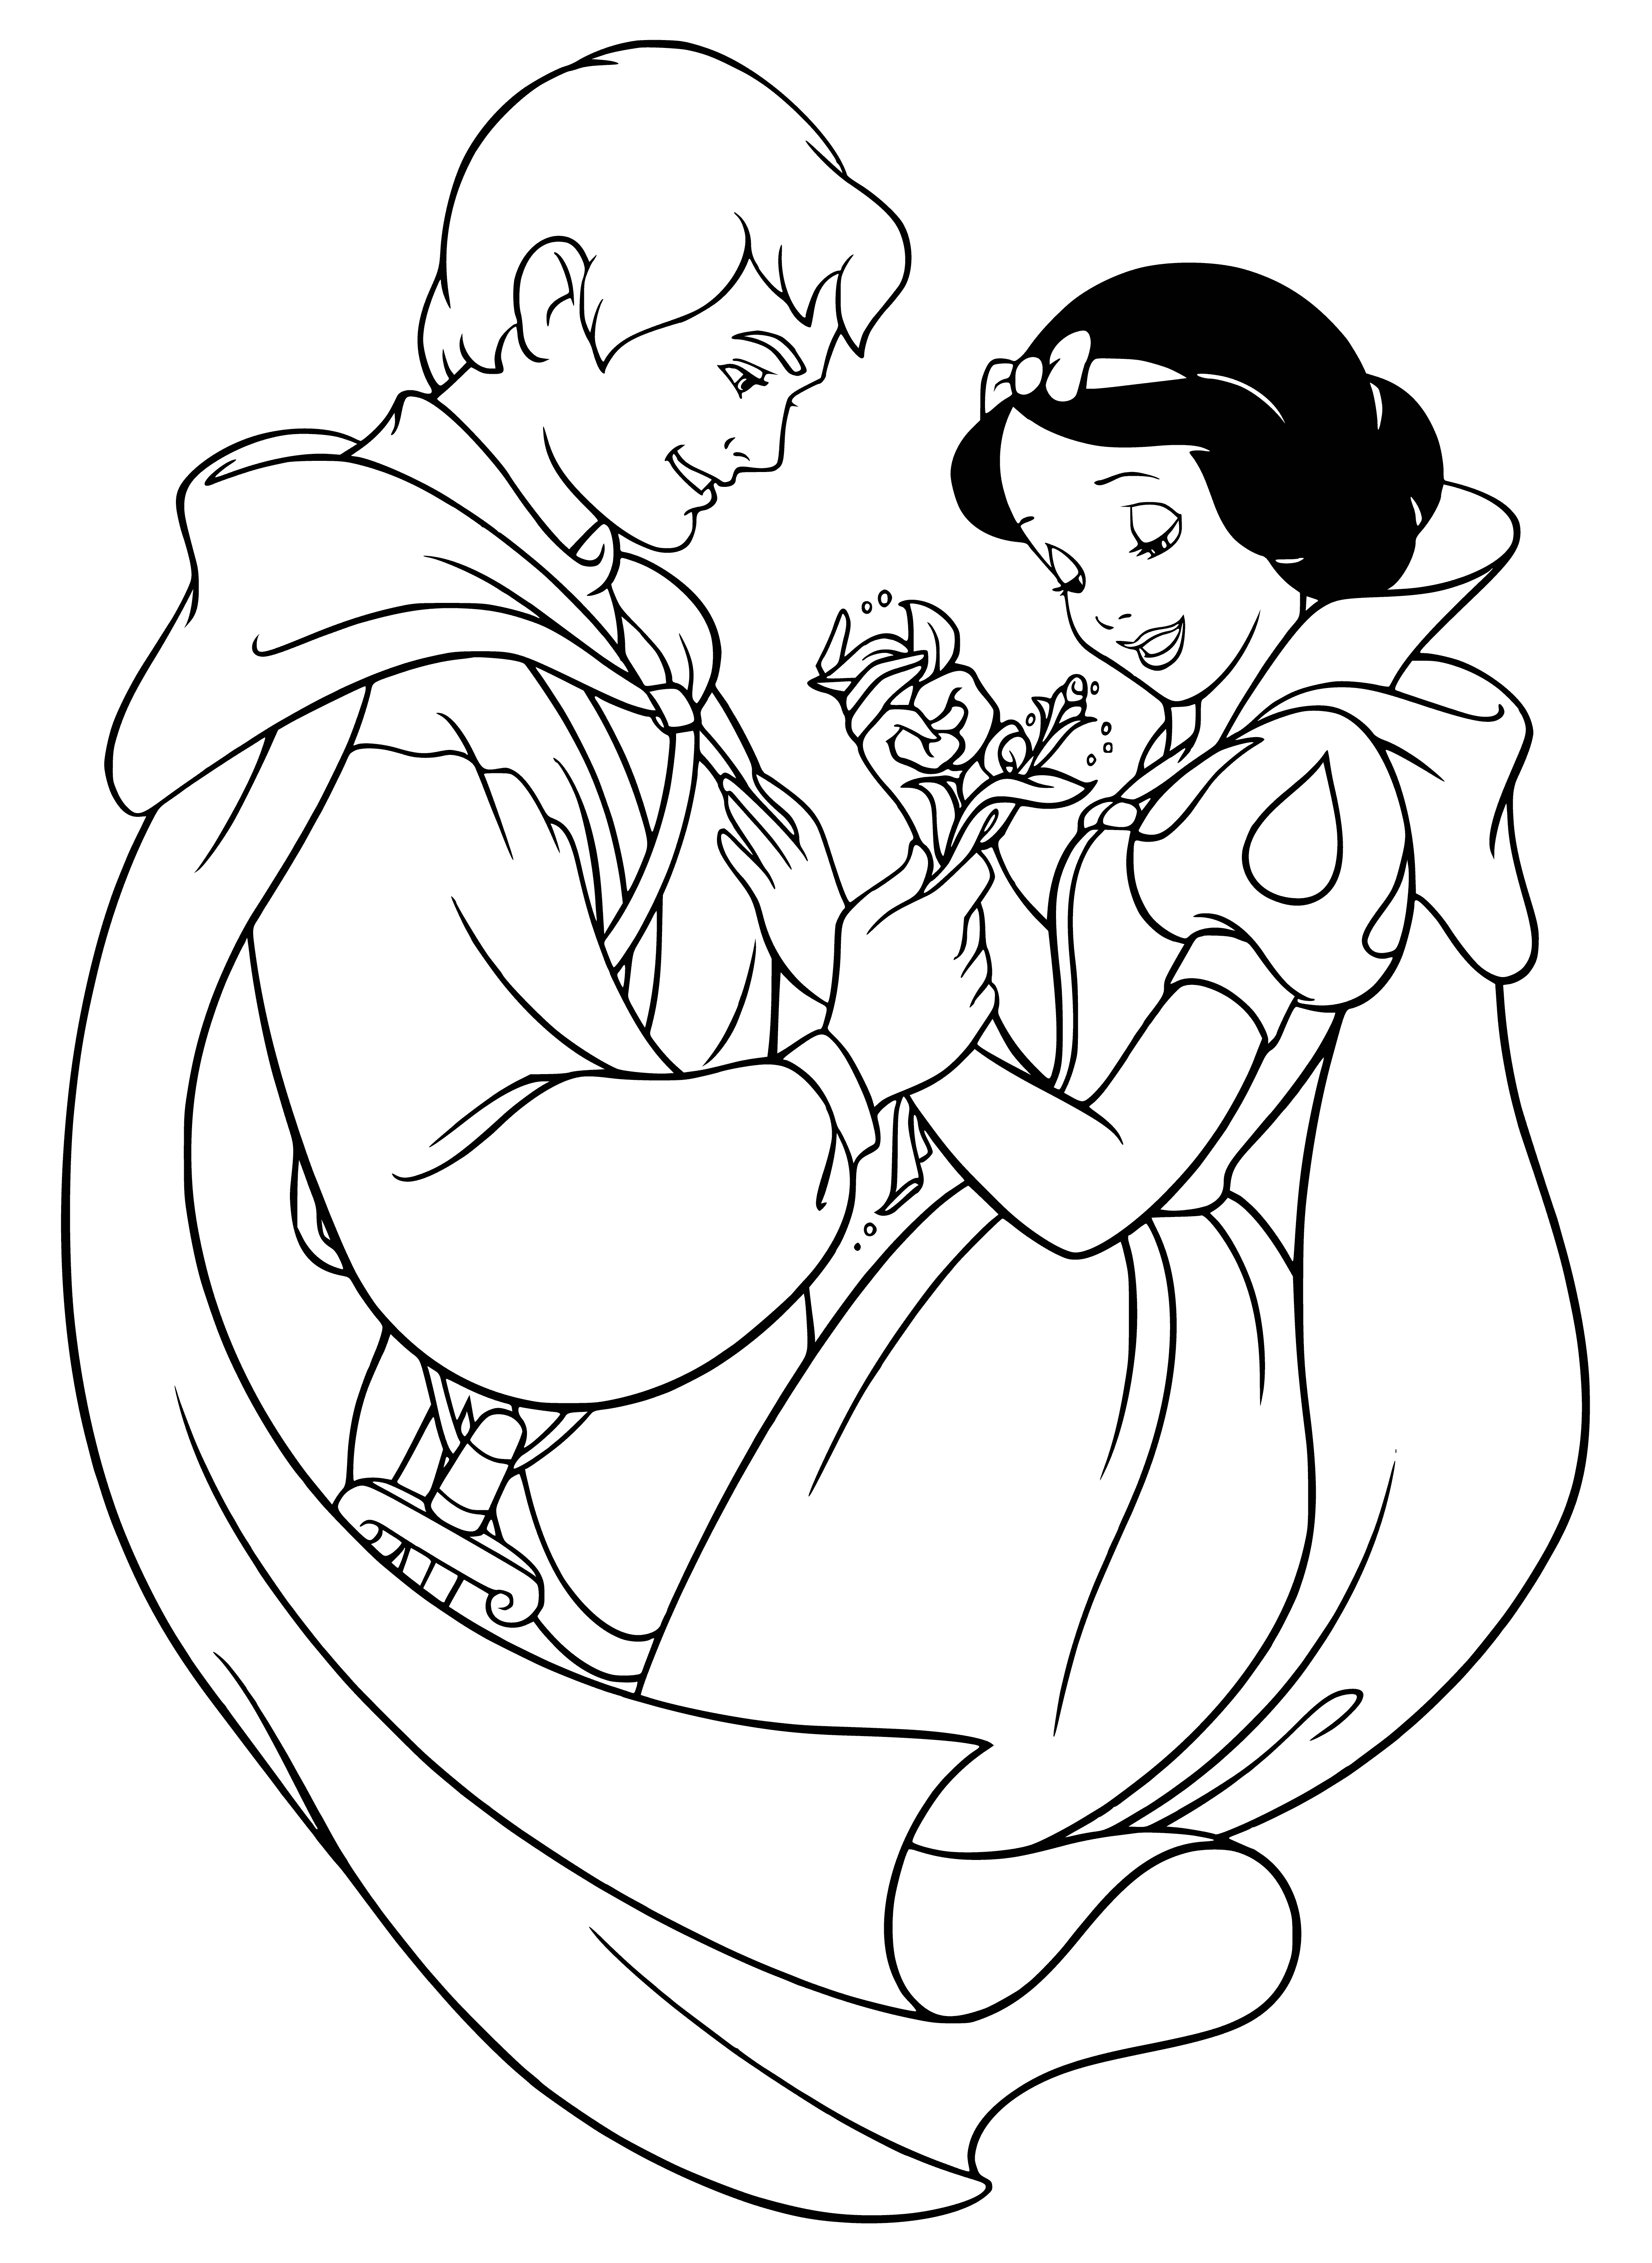 coloring page: The prince has fallen in love with Snow White and the seven dwarfs watch with curiosity.